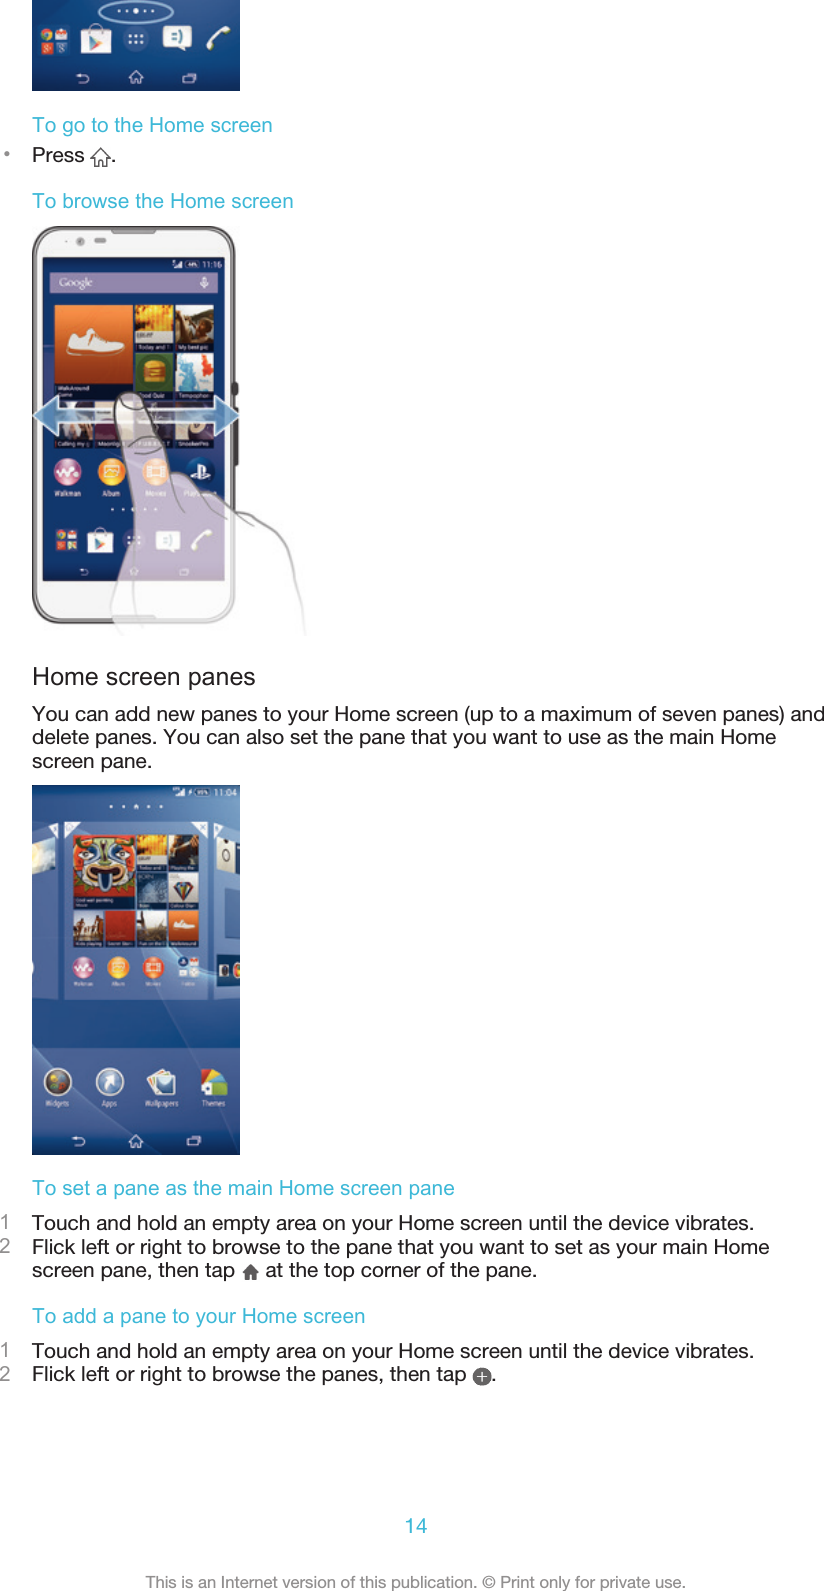 To go to the Home screen•Press  .To browse the Home screenHome screen panesYou can add new panes to your Home screen (up to a maximum of seven panes) anddelete panes. You can also set the pane that you want to use as the main Homescreen pane.To set a pane as the main Home screen pane1Touch and hold an empty area on your Home screen until the device vibrates.2Flick left or right to browse to the pane that you want to set as your main Homescreen pane, then tap   at the top corner of the pane.To add a pane to your Home screen1Touch and hold an empty area on your Home screen until the device vibrates.2Flick left or right to browse the panes, then tap  .14This is an Internet version of this publication. © Print only for private use.